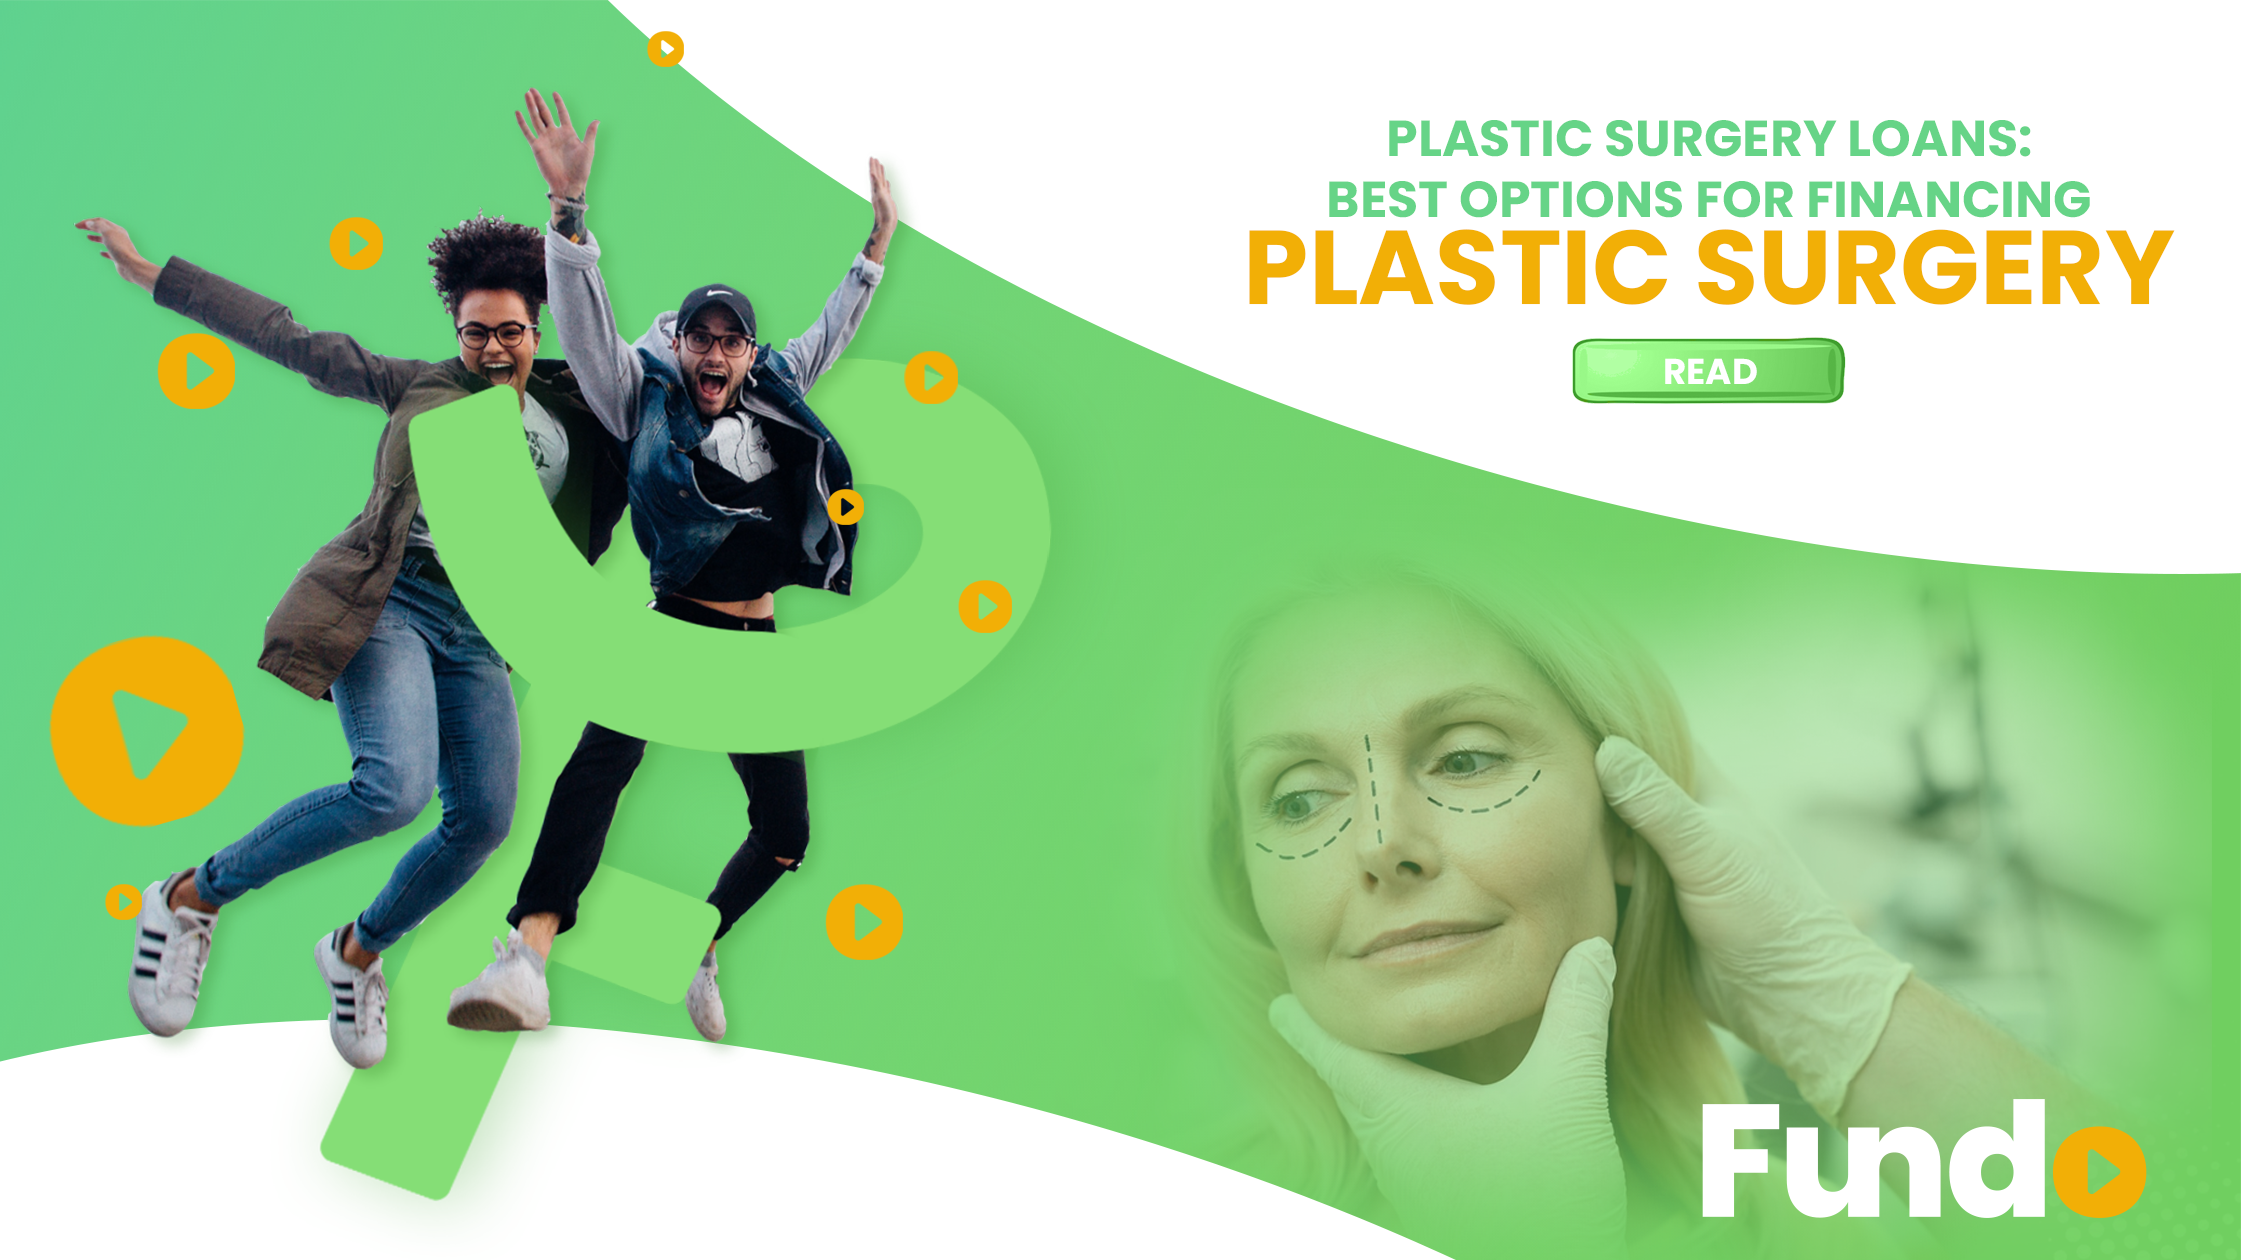 PLASTIC SURGERY LOANS – BEST OPTIONS FOR FINANCING PLASTIC SURGERY